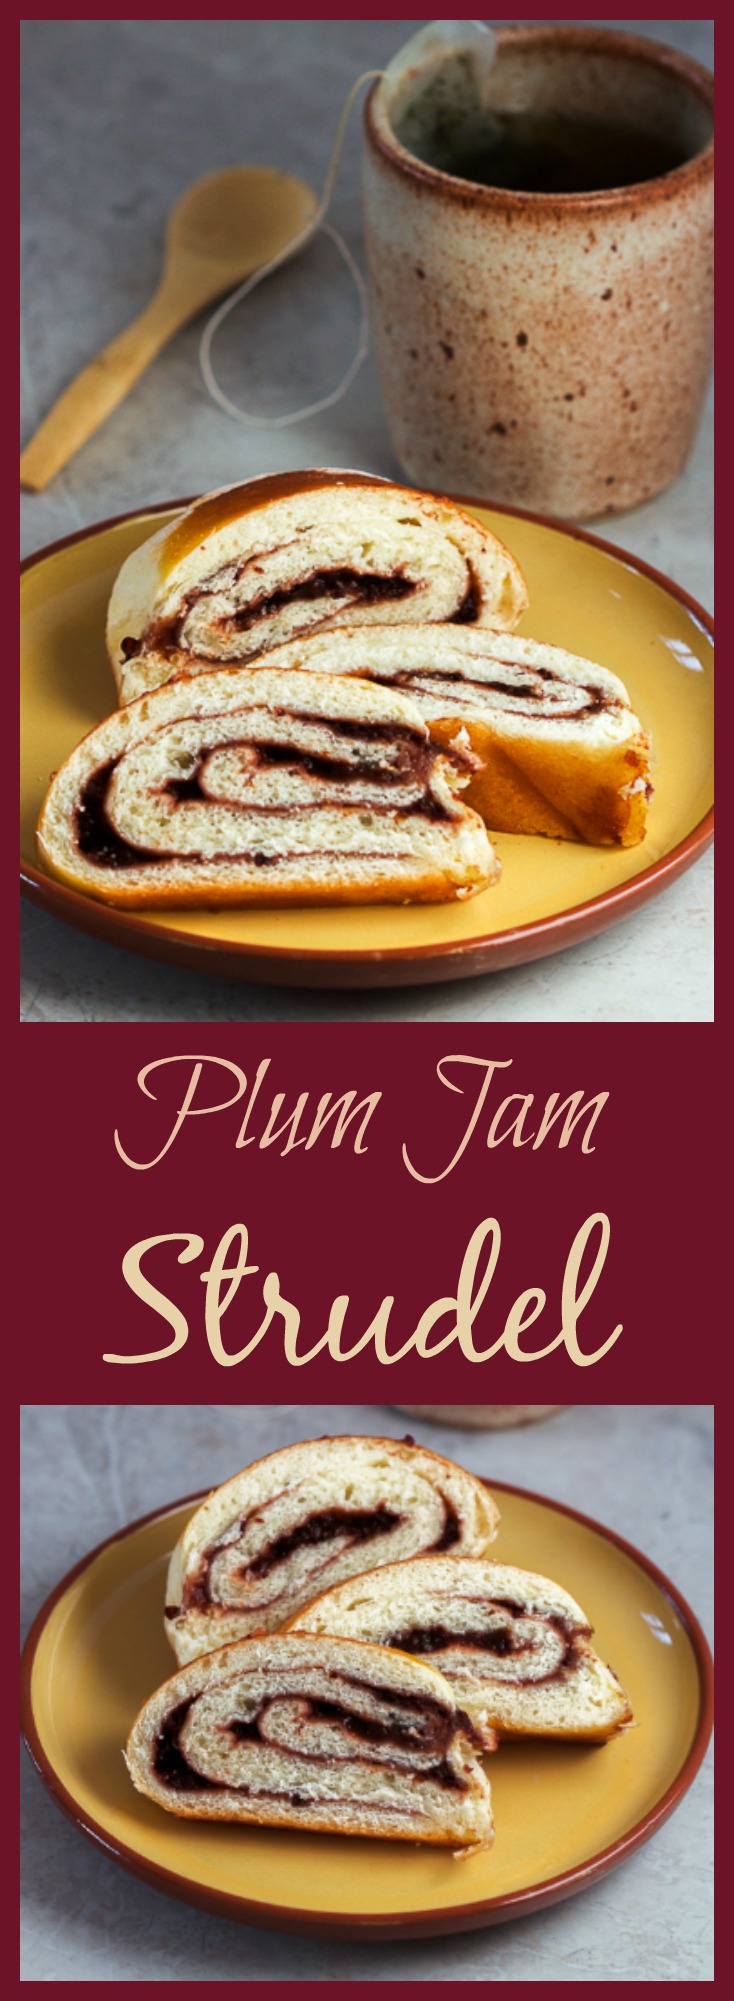 Soothe your appetite for pastries with a warm, plum jam filled strudel. All that this straightforward dessert requires from you is a little patience while waiting for the dough to rise. Perfect with a cup of tea on a rainy weekend afternoon. 